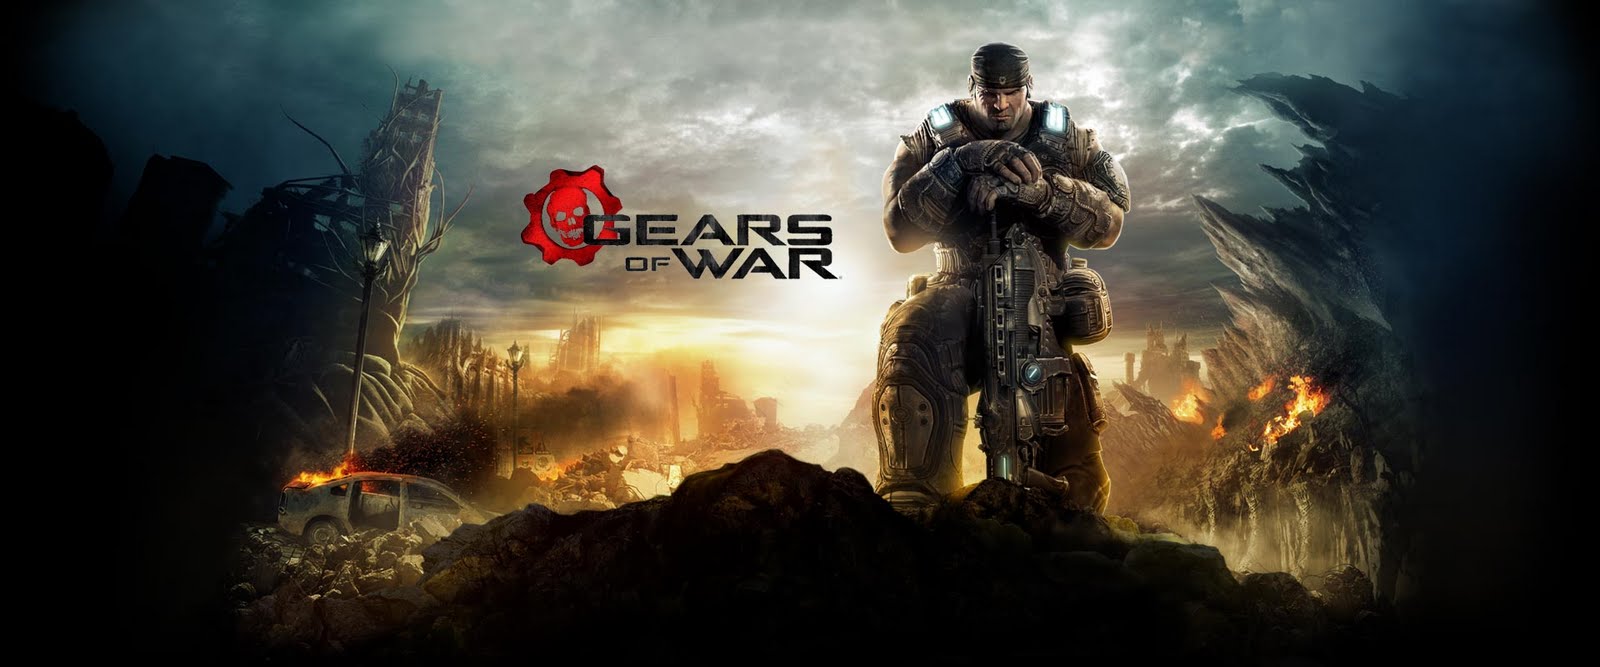  source Presented by LEAGUE OF FICTION Gears of War Wallpaper